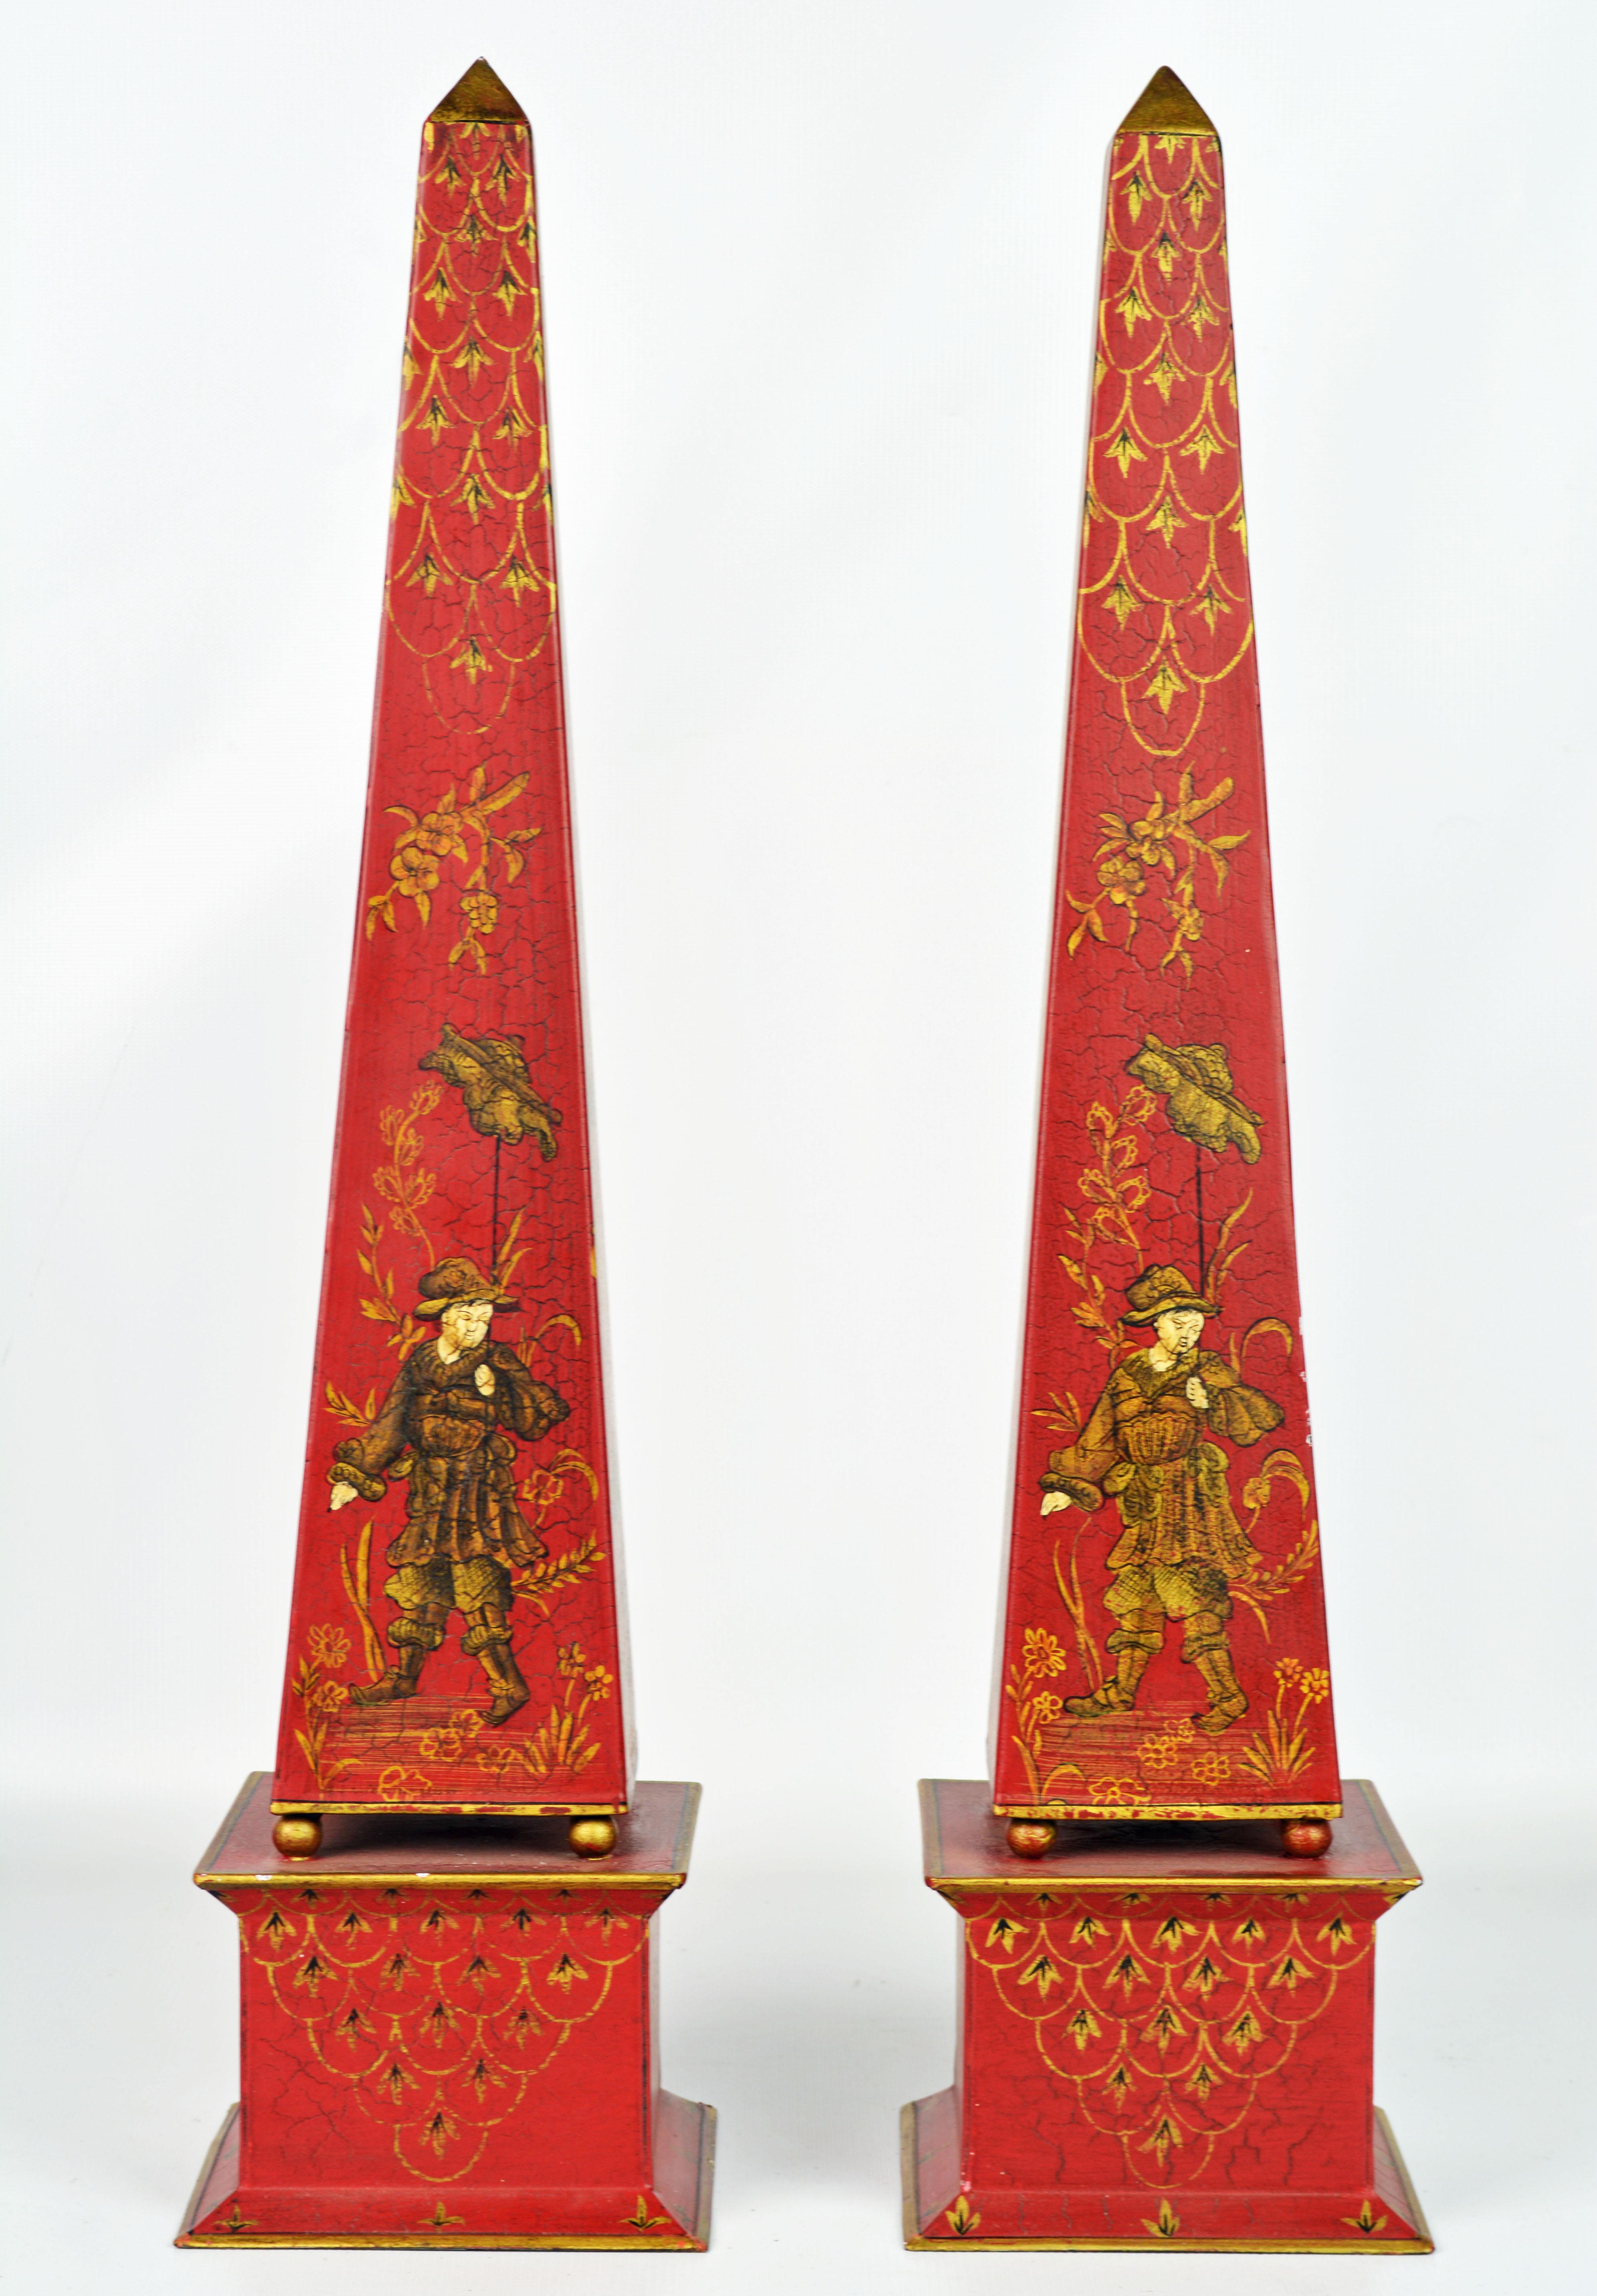 Standing 22 inches tall and painted in the Chinese taste on a Venetian red background these obelisks make a fashionable statement.